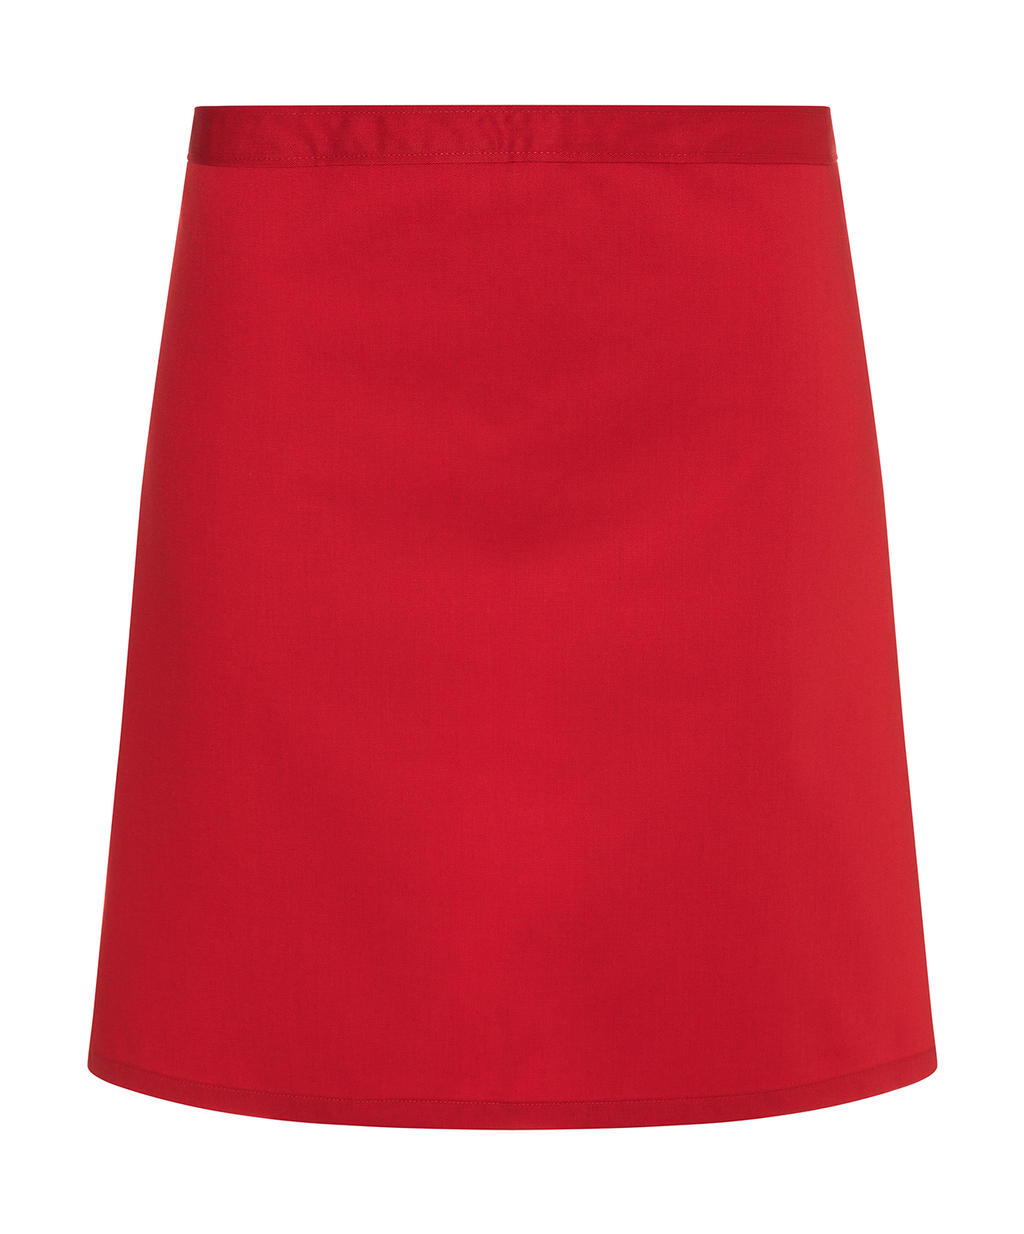  Waist Apron Basic 70 x 55 cm in Farbe Red